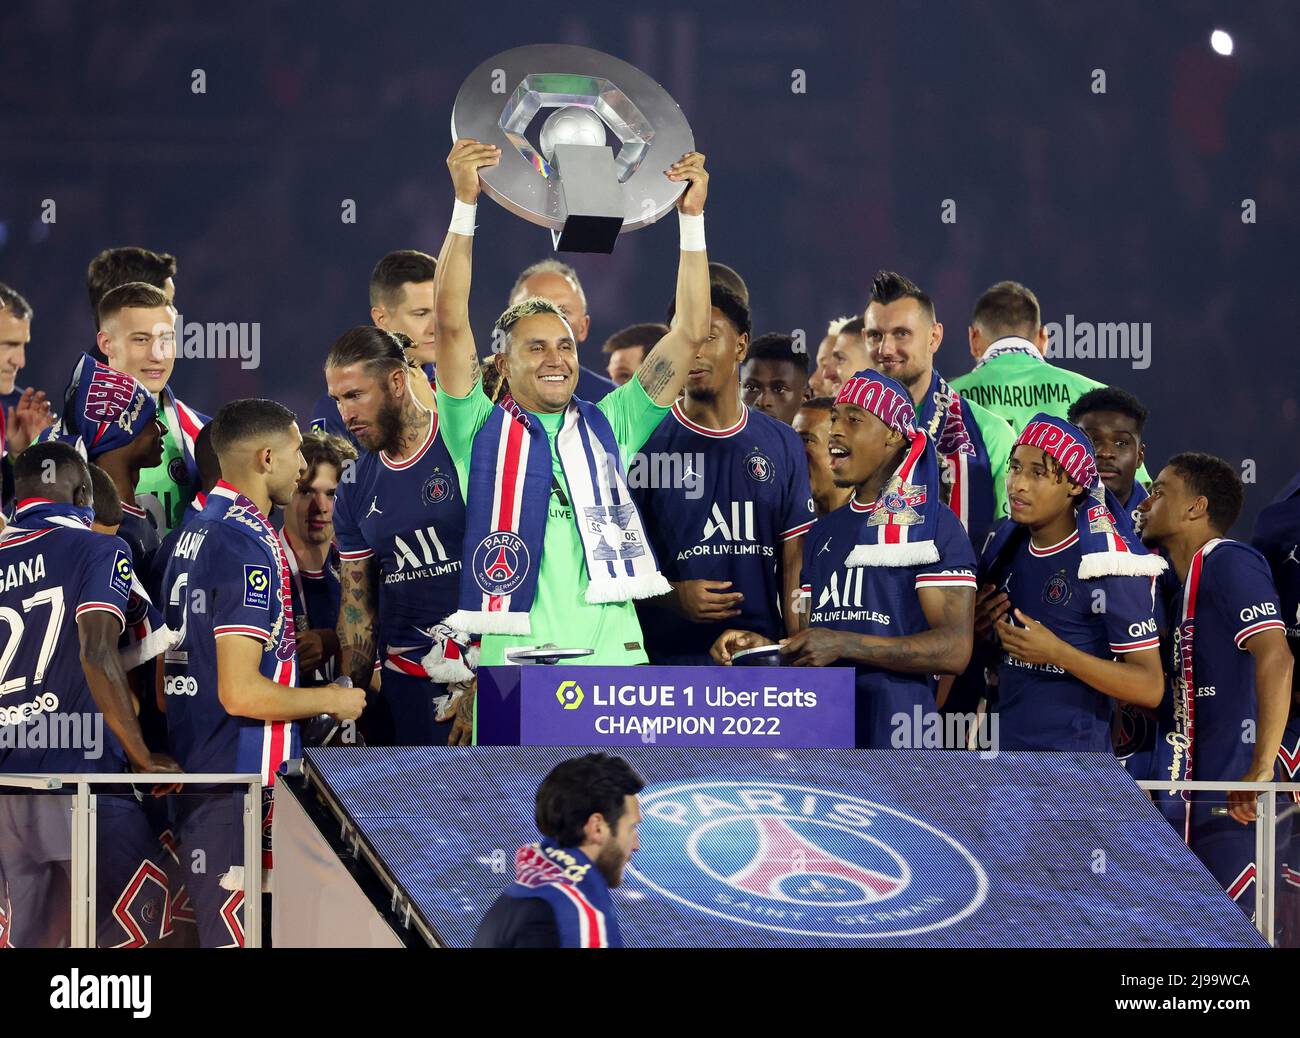 Goalkeeper of PSG Keylor Navas and teammates celebrate during the Ligue 1  Trophy Ceremony following the French championship Ligue 1 football match  between Paris Saint-Germain (PSG) and FC Metz on May 21,